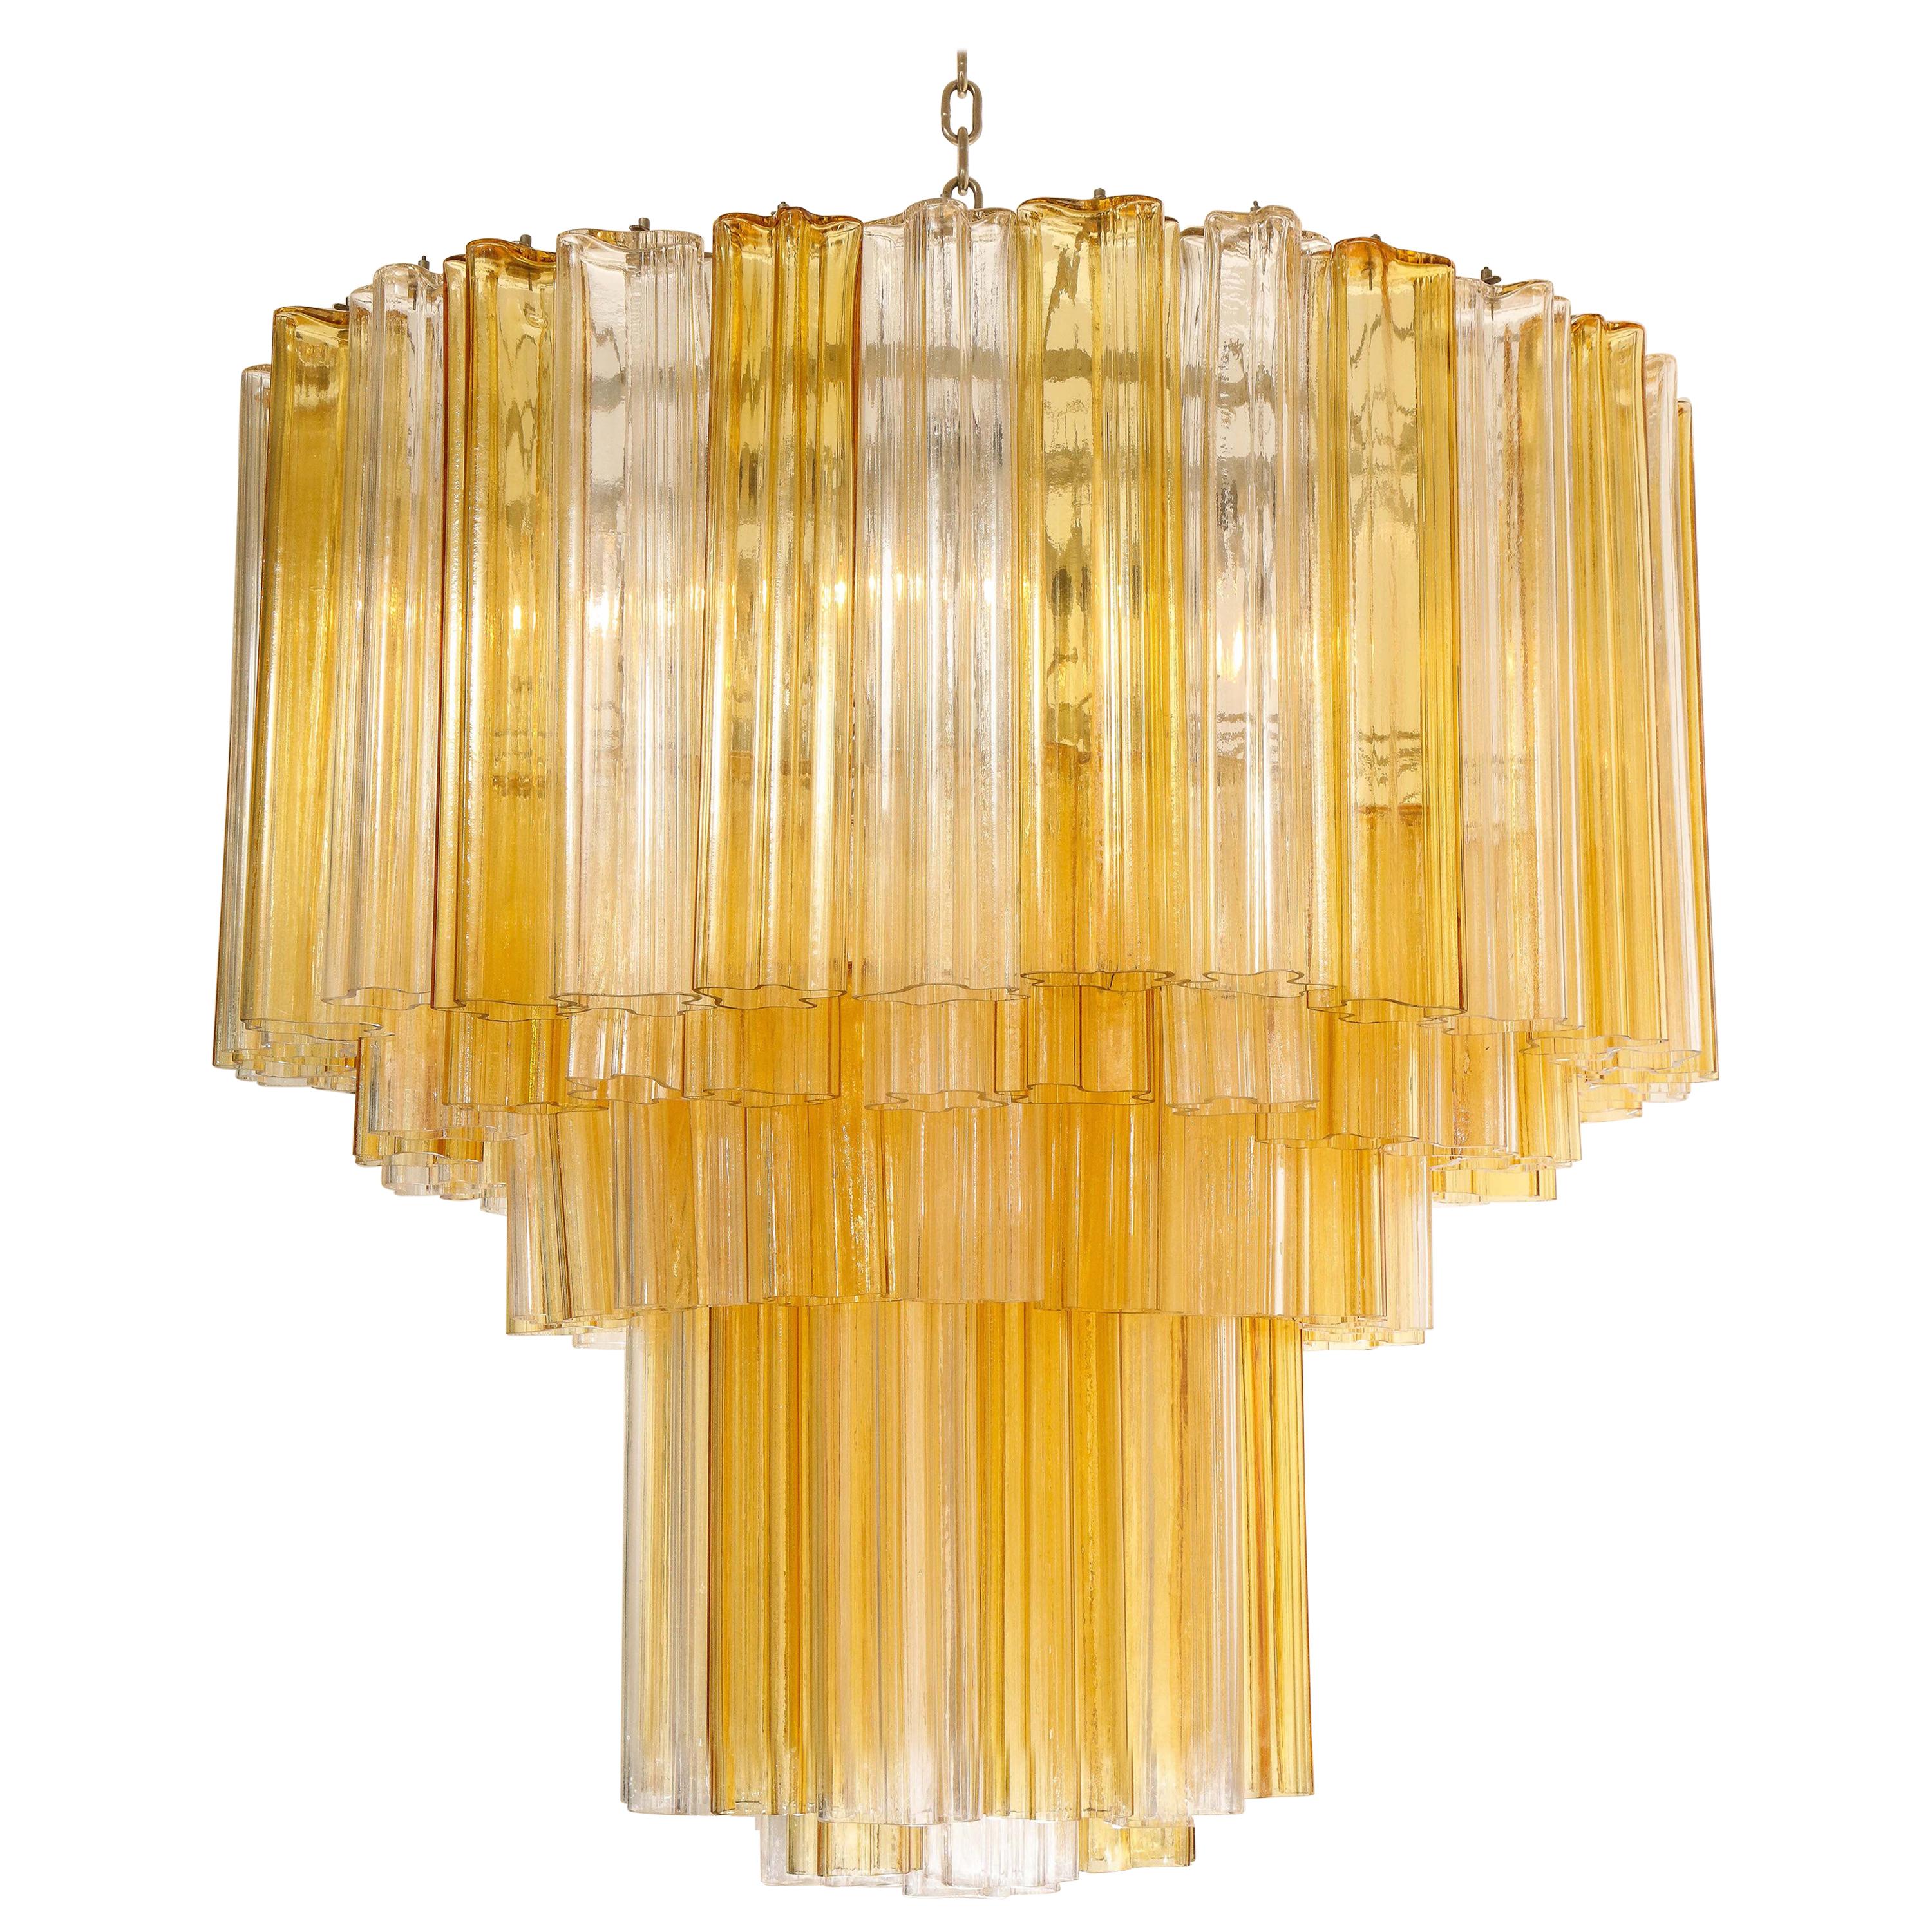 Monumental Venini Tiered Clear and Amber Tronchi Glass Chandelier